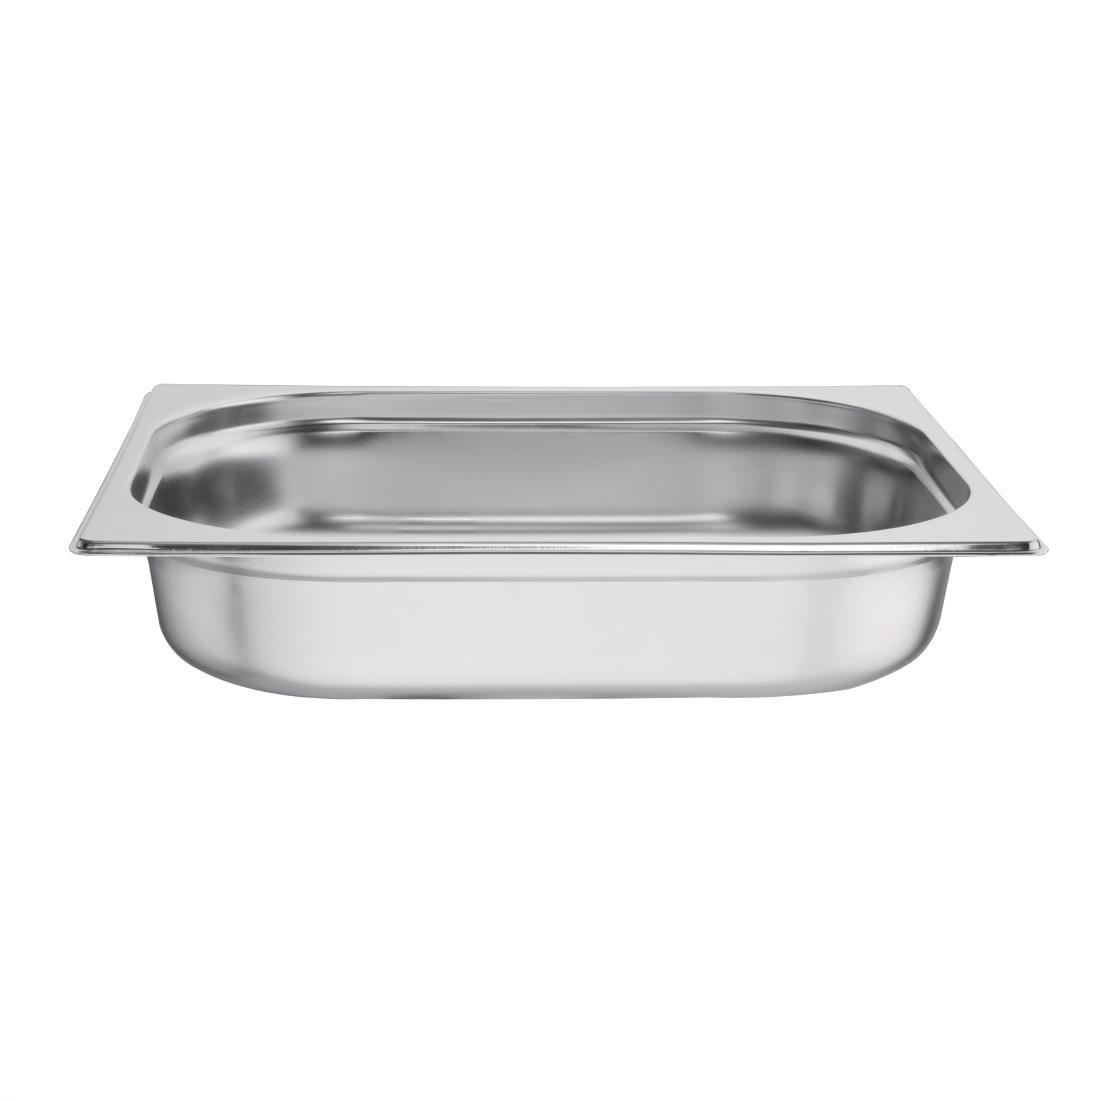 Vogue Stainless Steel 1/2 Gastronorm Pan 65mm - K927  - 2